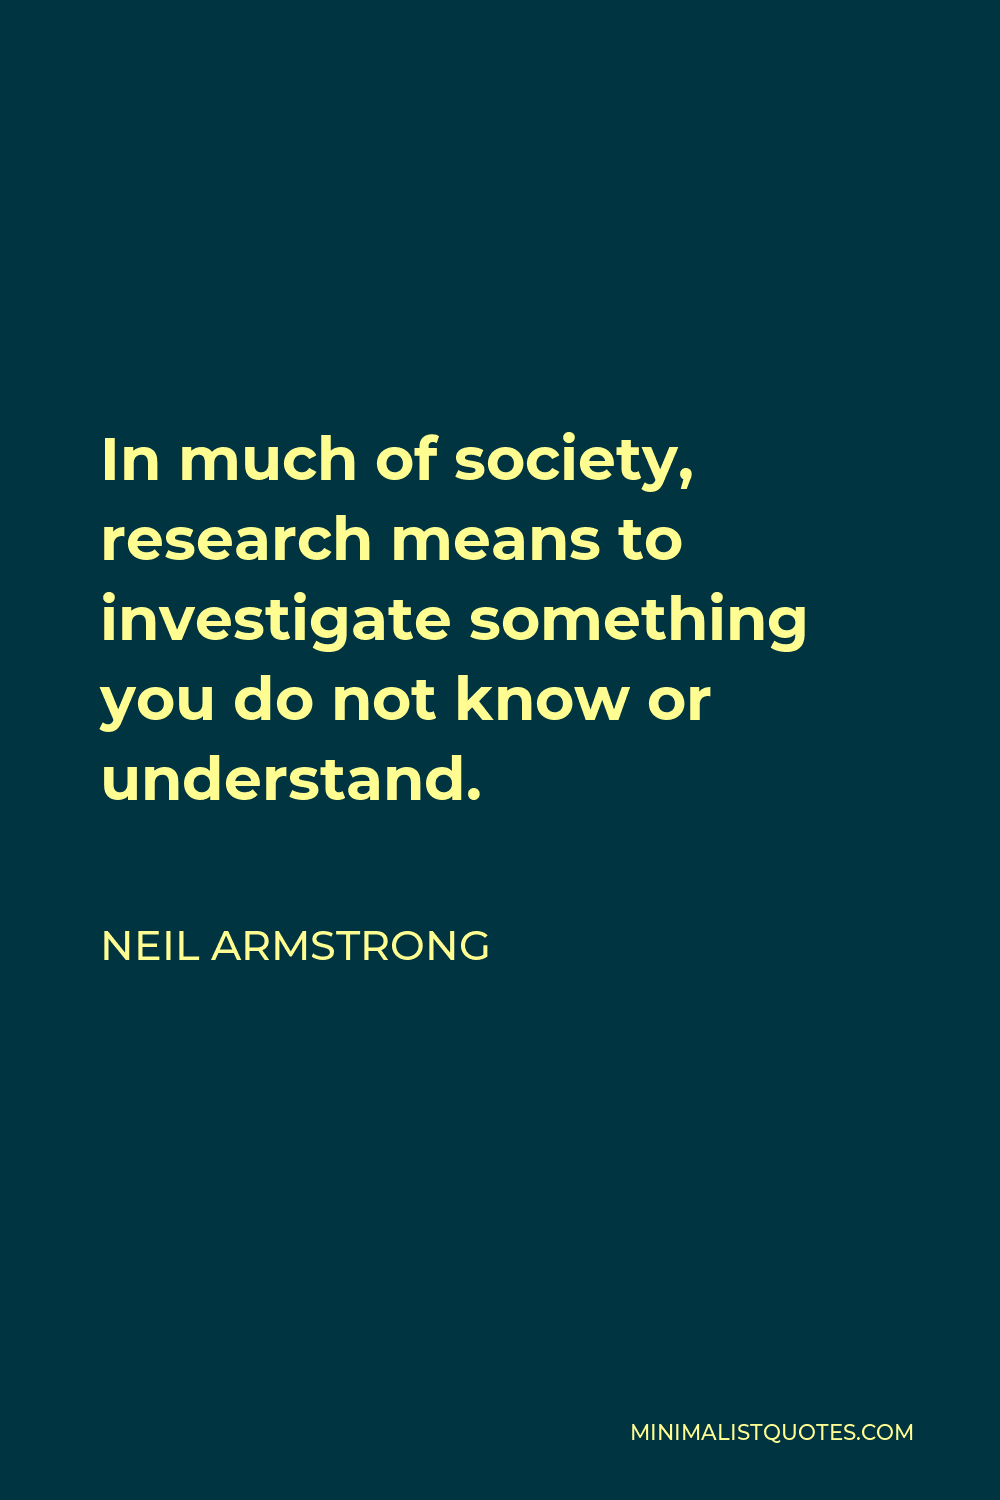 Neil Armstrong Quote - In much of society, research means to investigate something you do not know or understand.